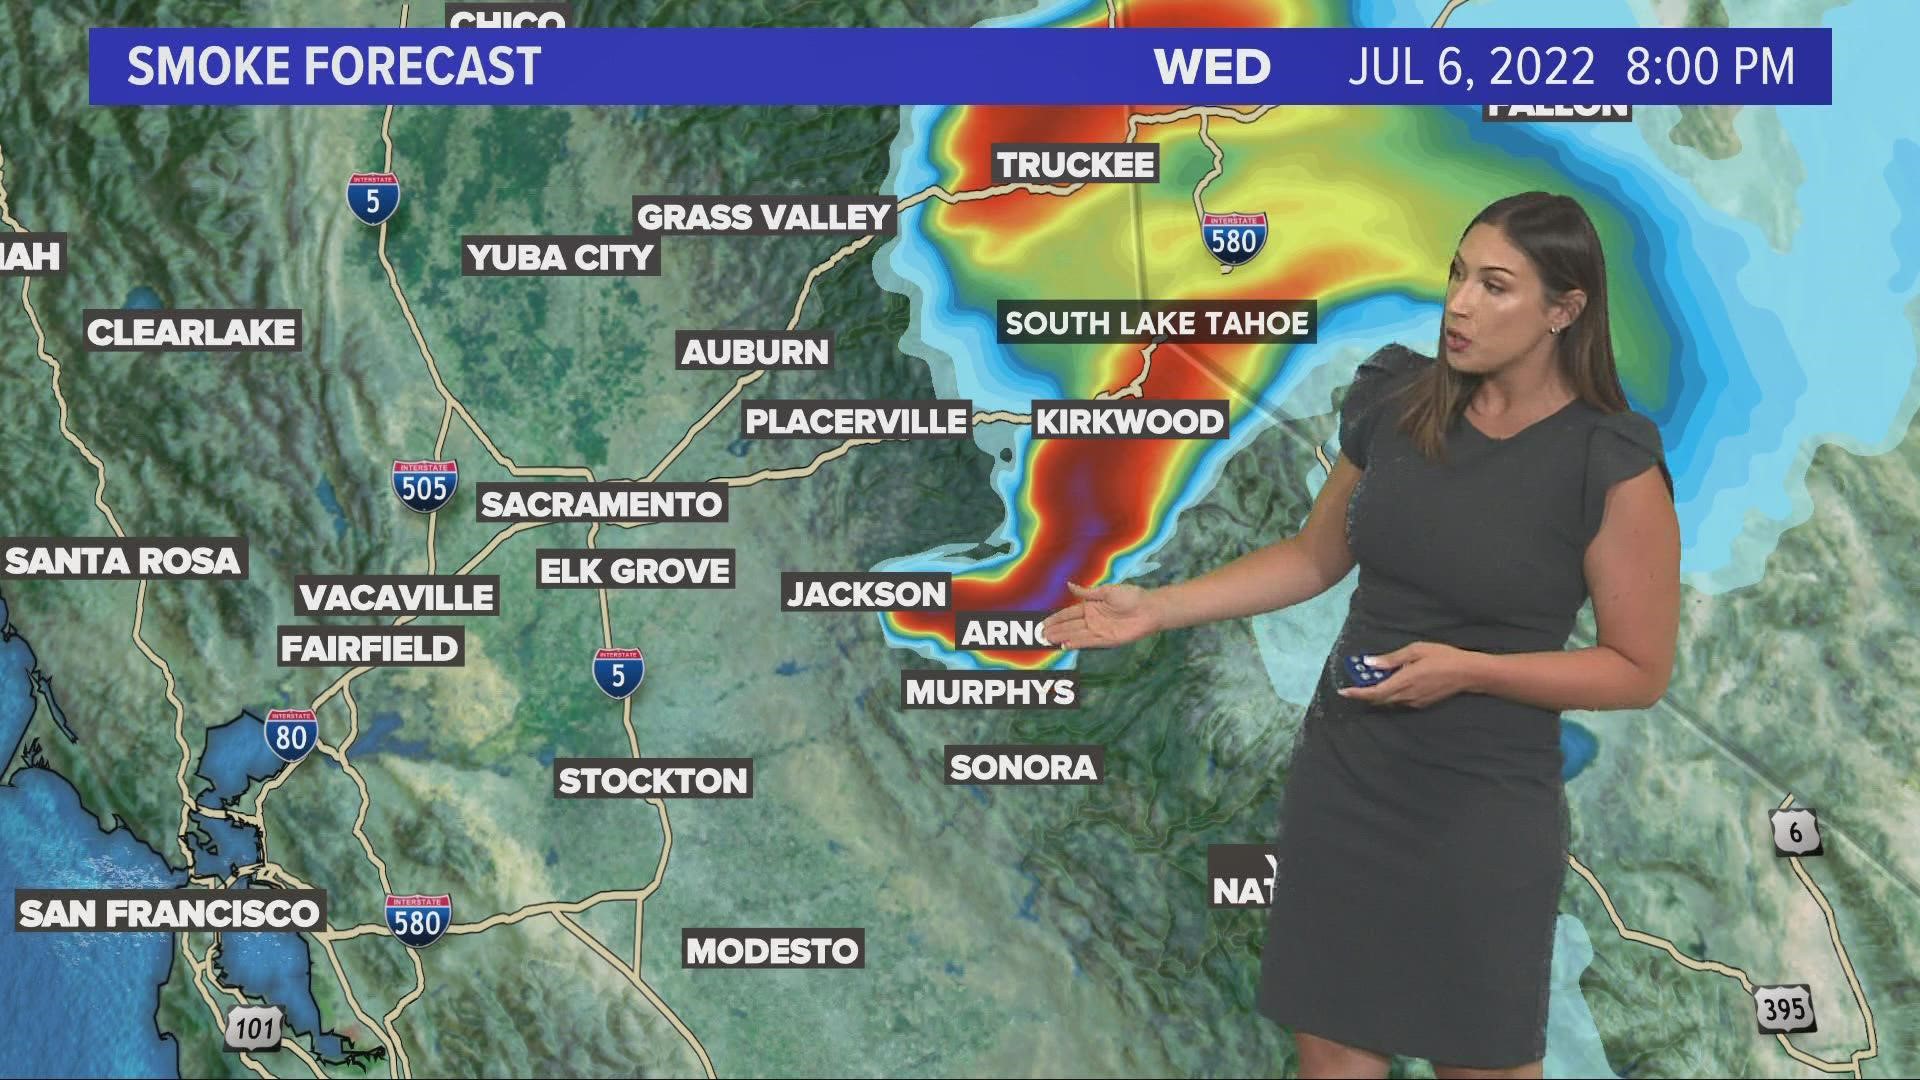 Meteorologist Carley Gomez has your latest smoke and air forecast from the Electra Fire.